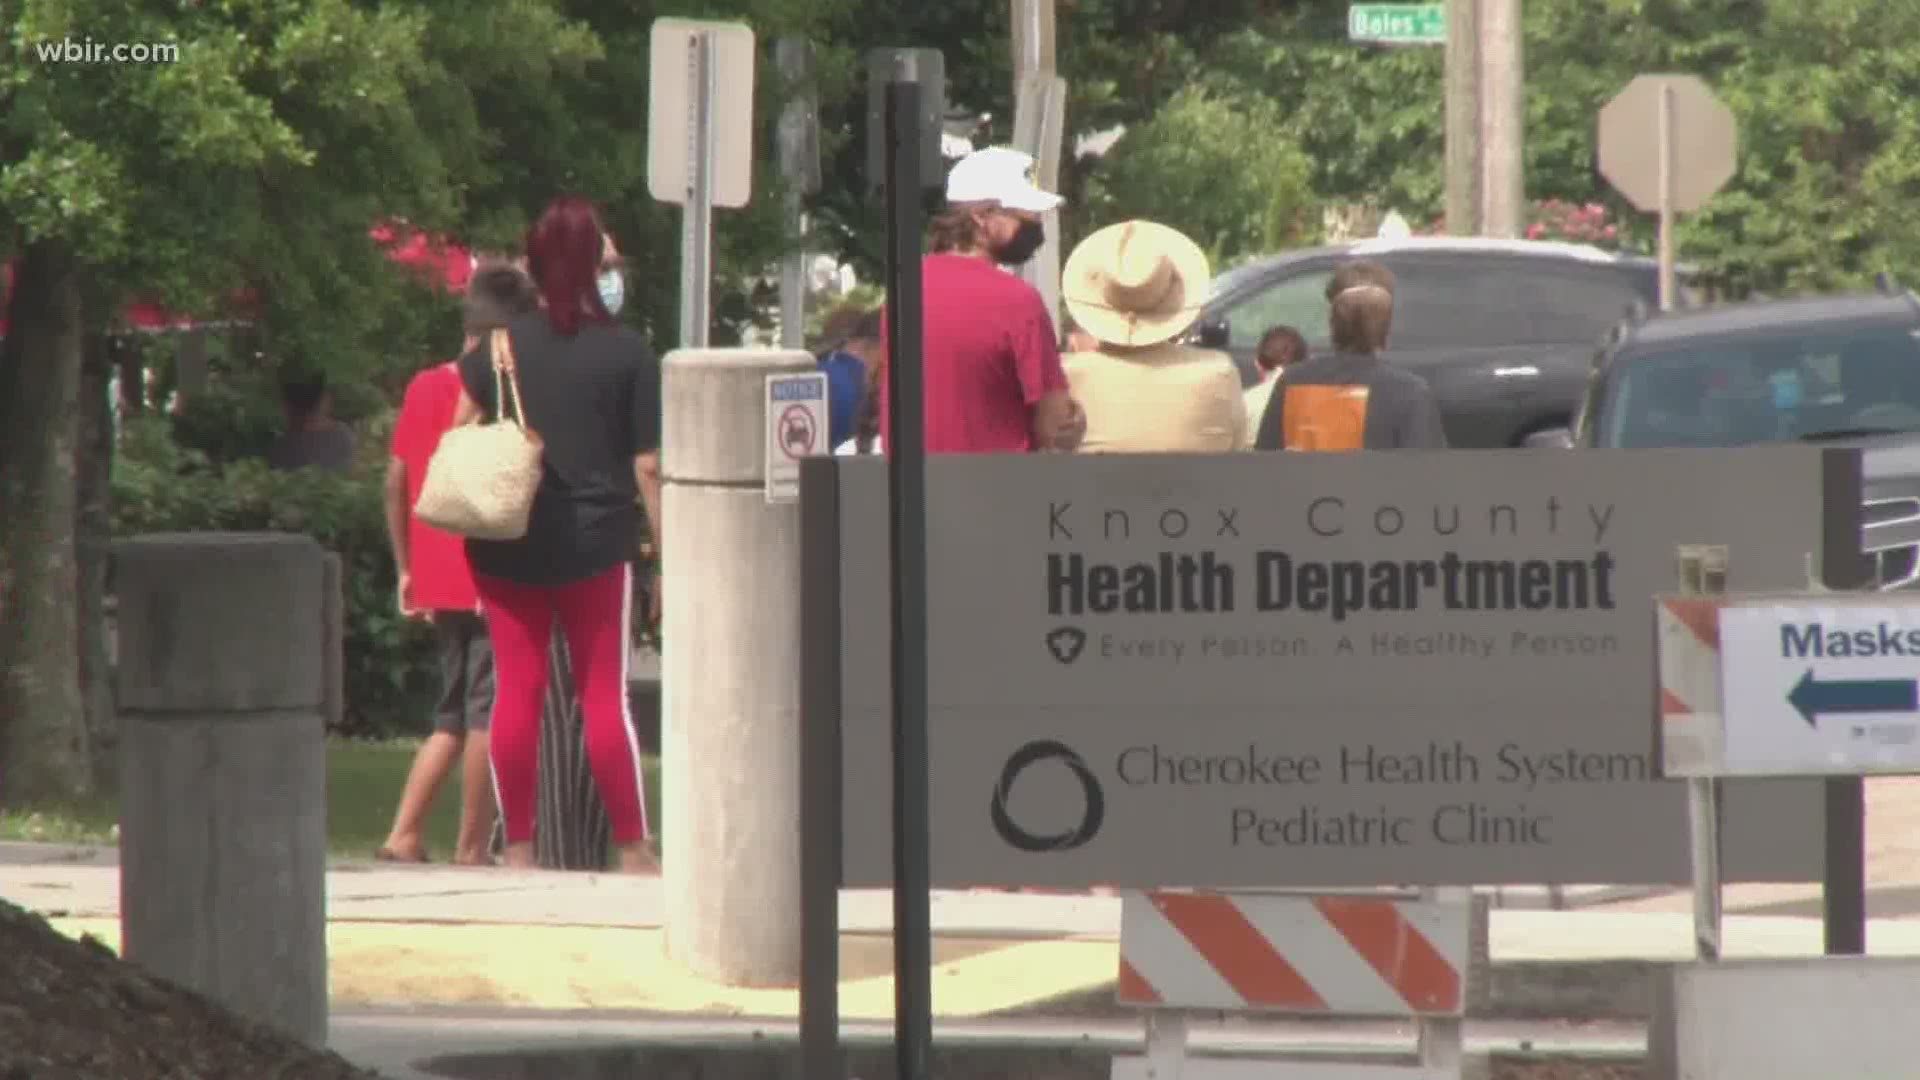 The director of the Knox County Health Department said wait times have stretched to an hour or more.